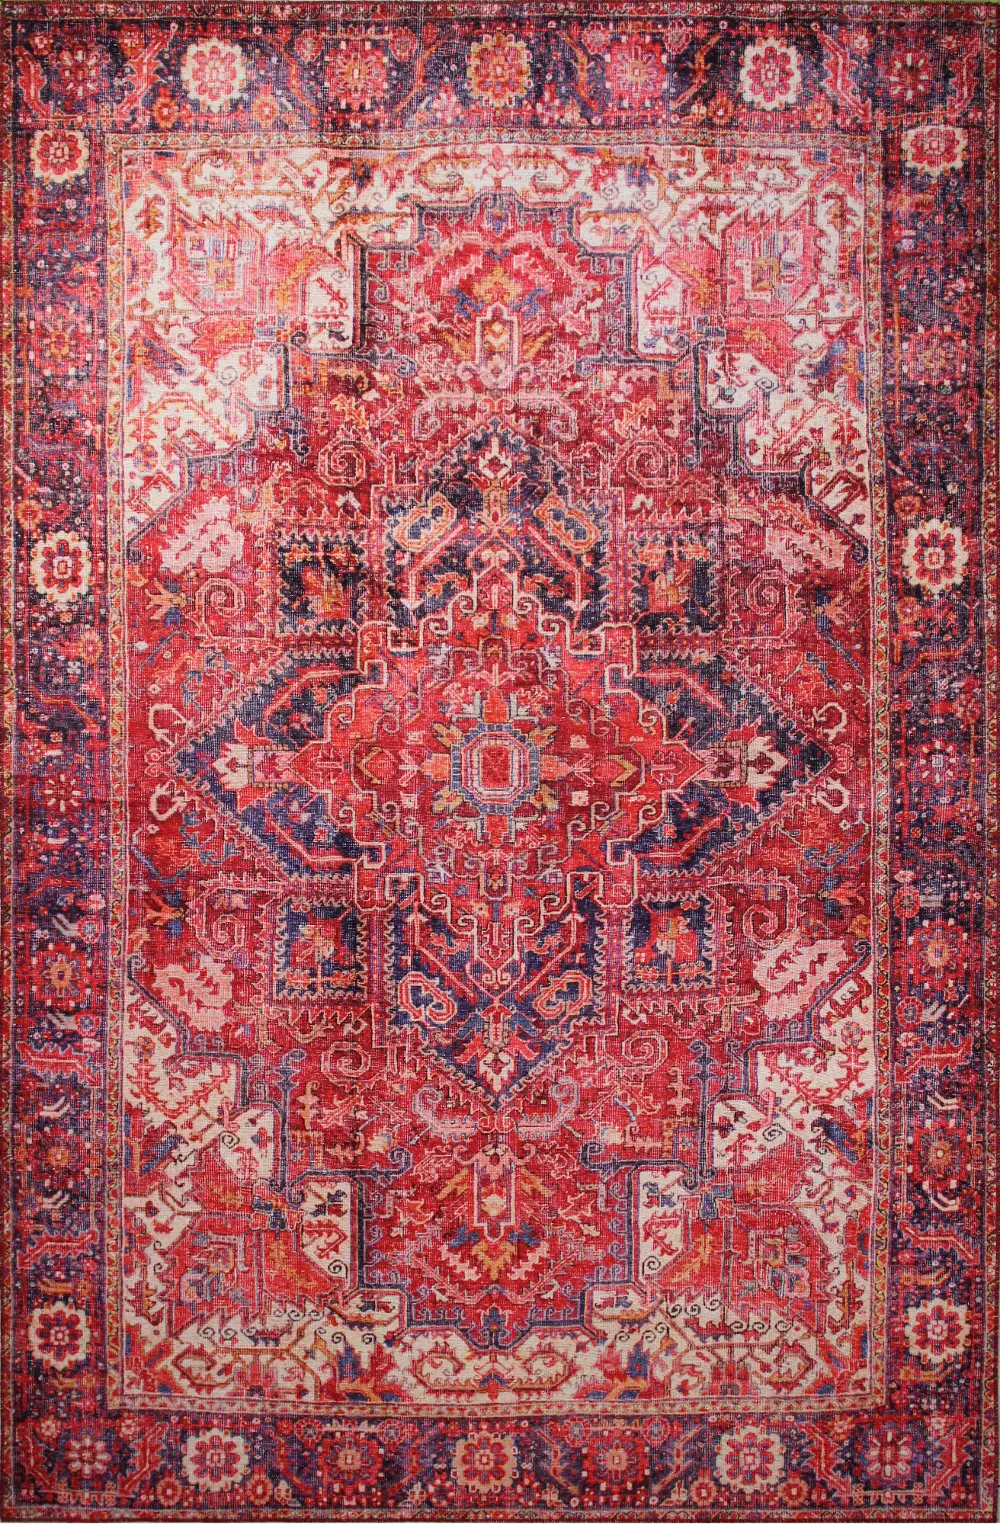 I166-RU-4X6-NR101 4 x 6 Small Traditional Zac Blue and Red Area Rug - Impressions-1